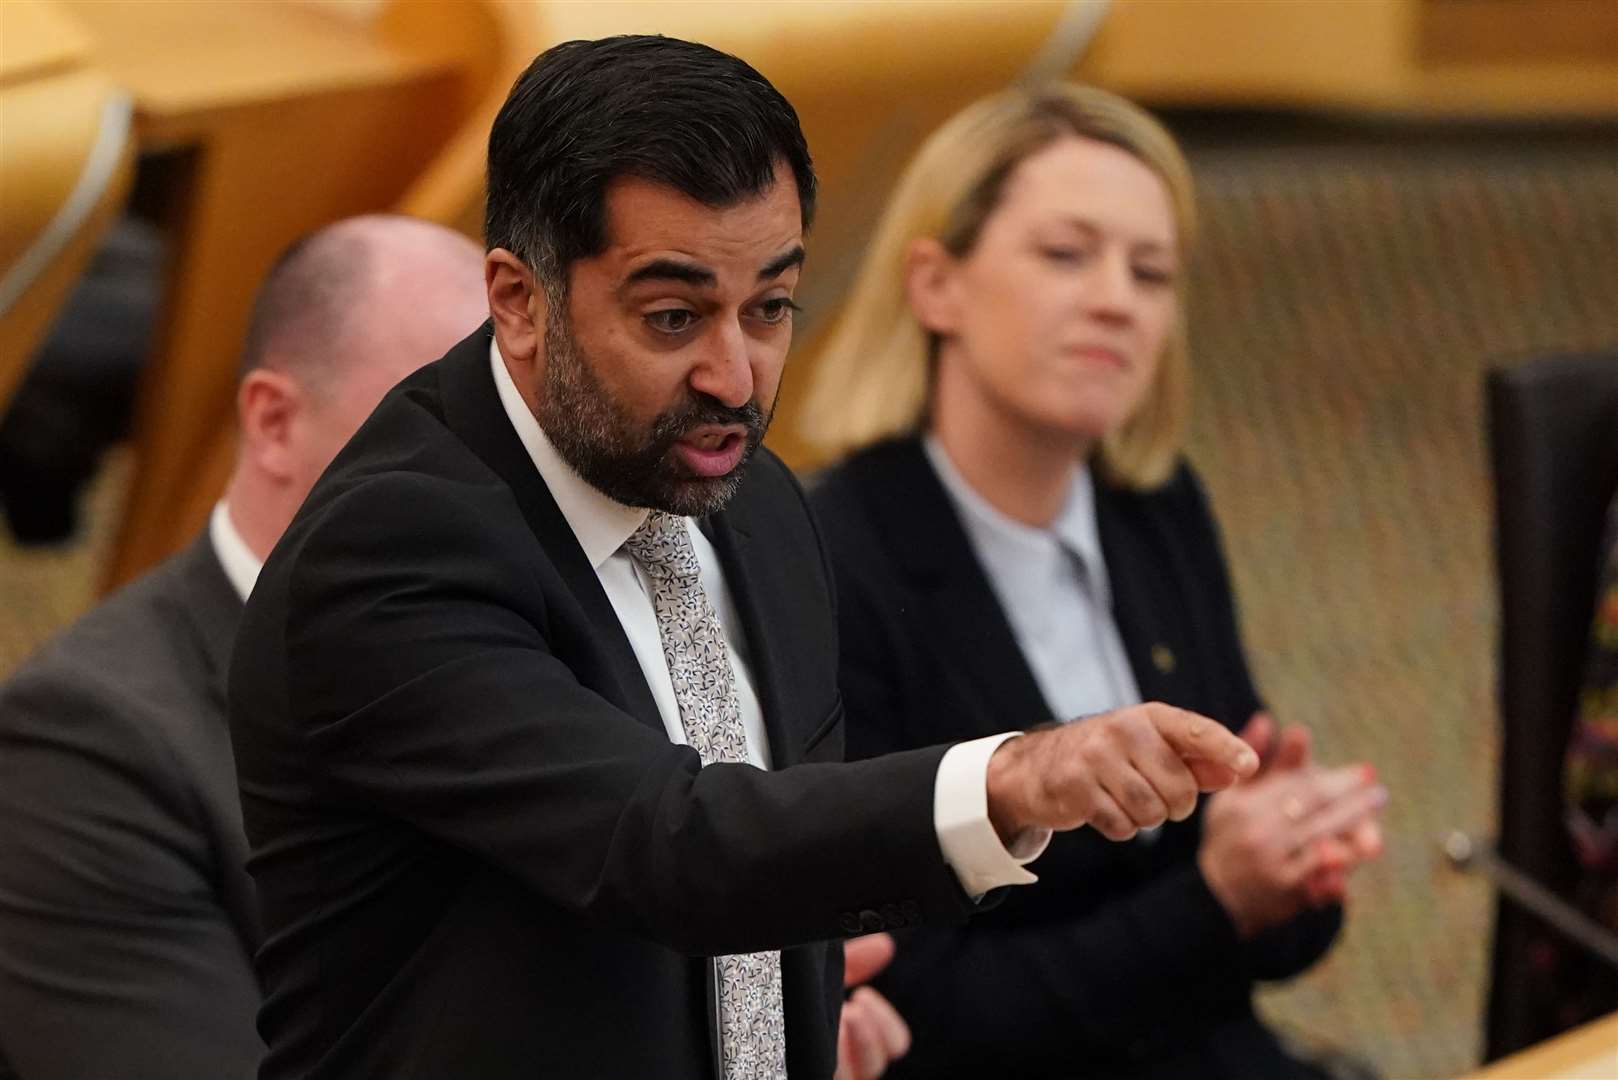 Humza Yousaf said he is not considering standing down (Andrew Milligan/PA)